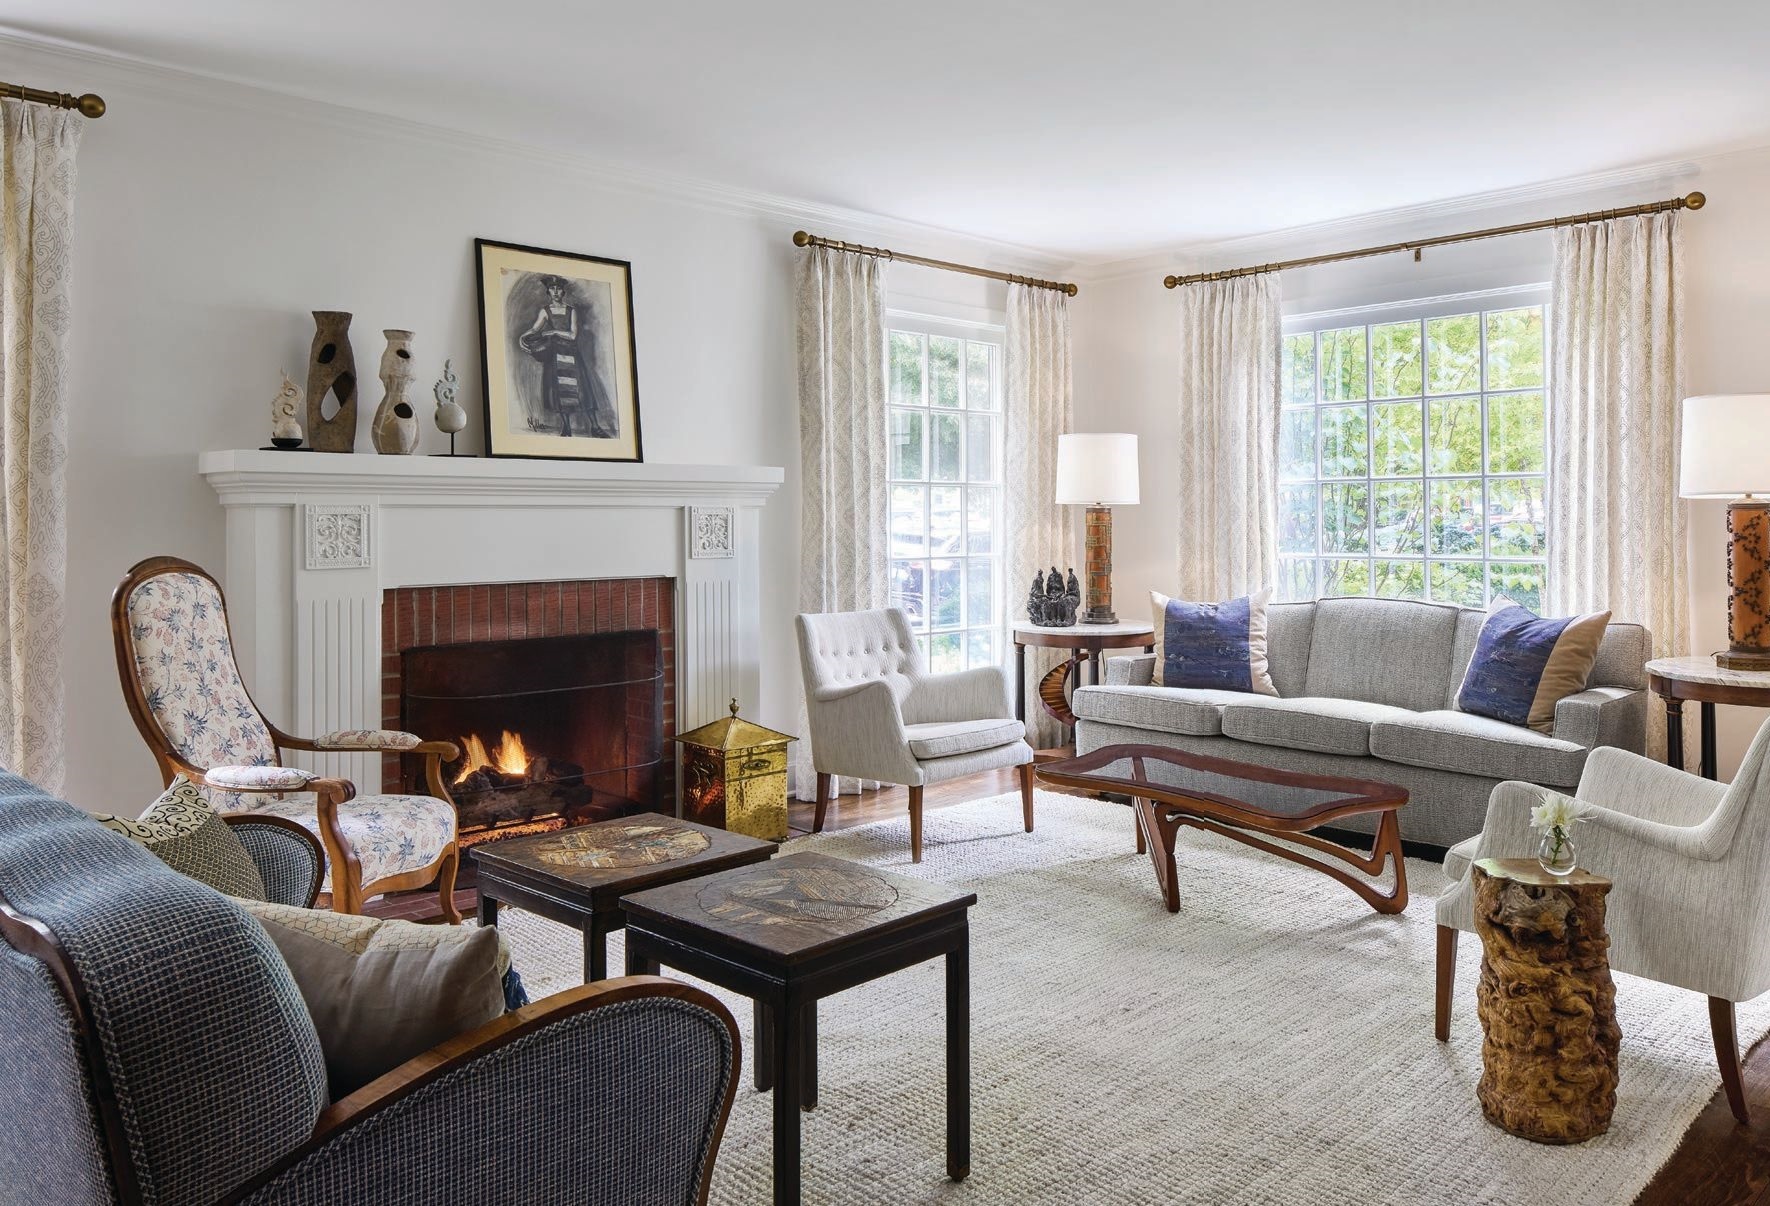 The living room features decorative pillows by textile artist Lynda O’Connor PHOTO BY DUSTIN HALLECK